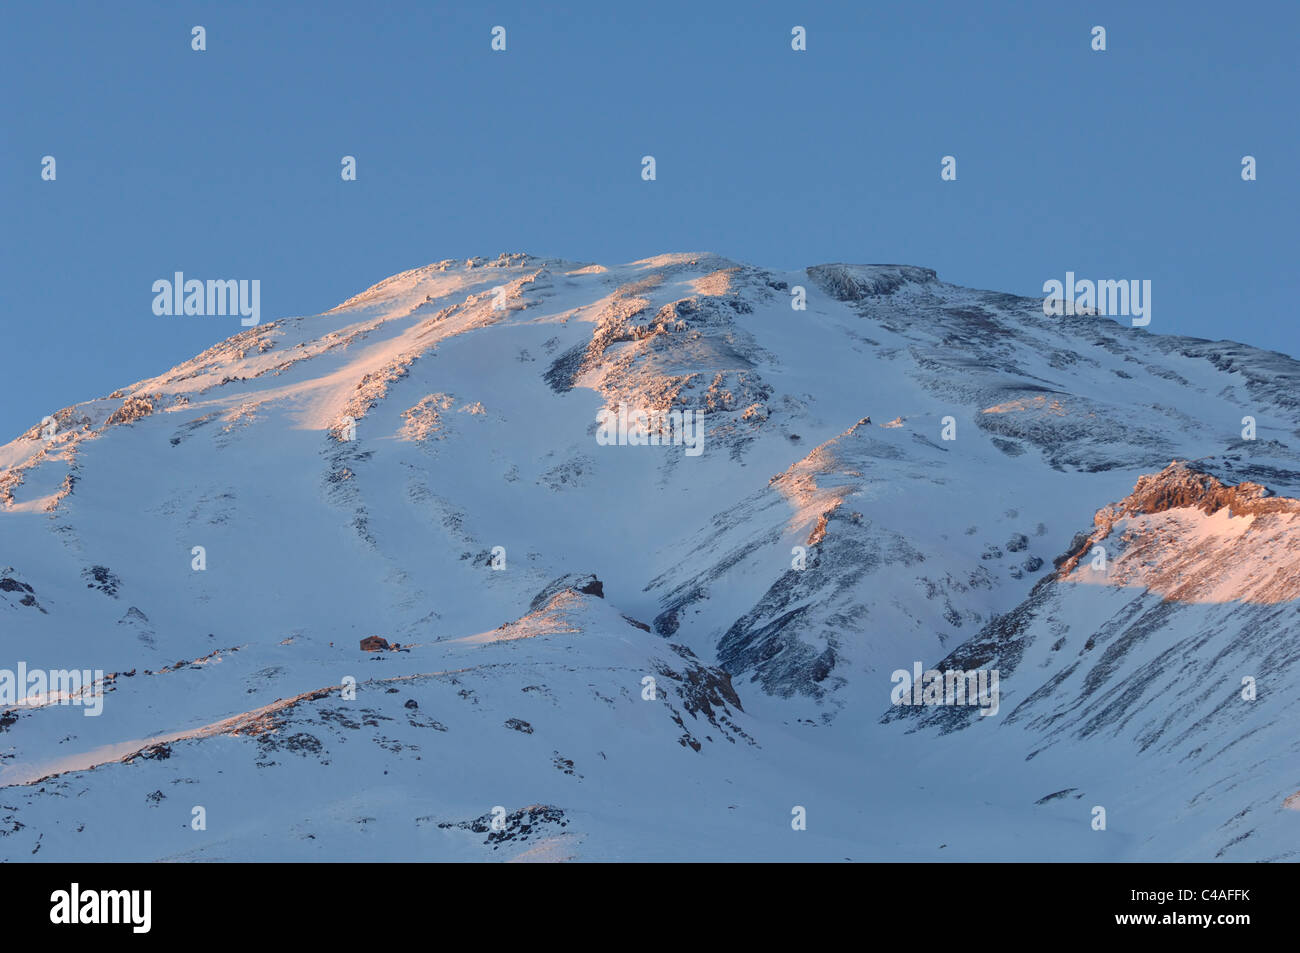 The slopes of a snow covered Mount Damavand in the Alborz mountains of Iran bathed in alpenflow Stock Photo